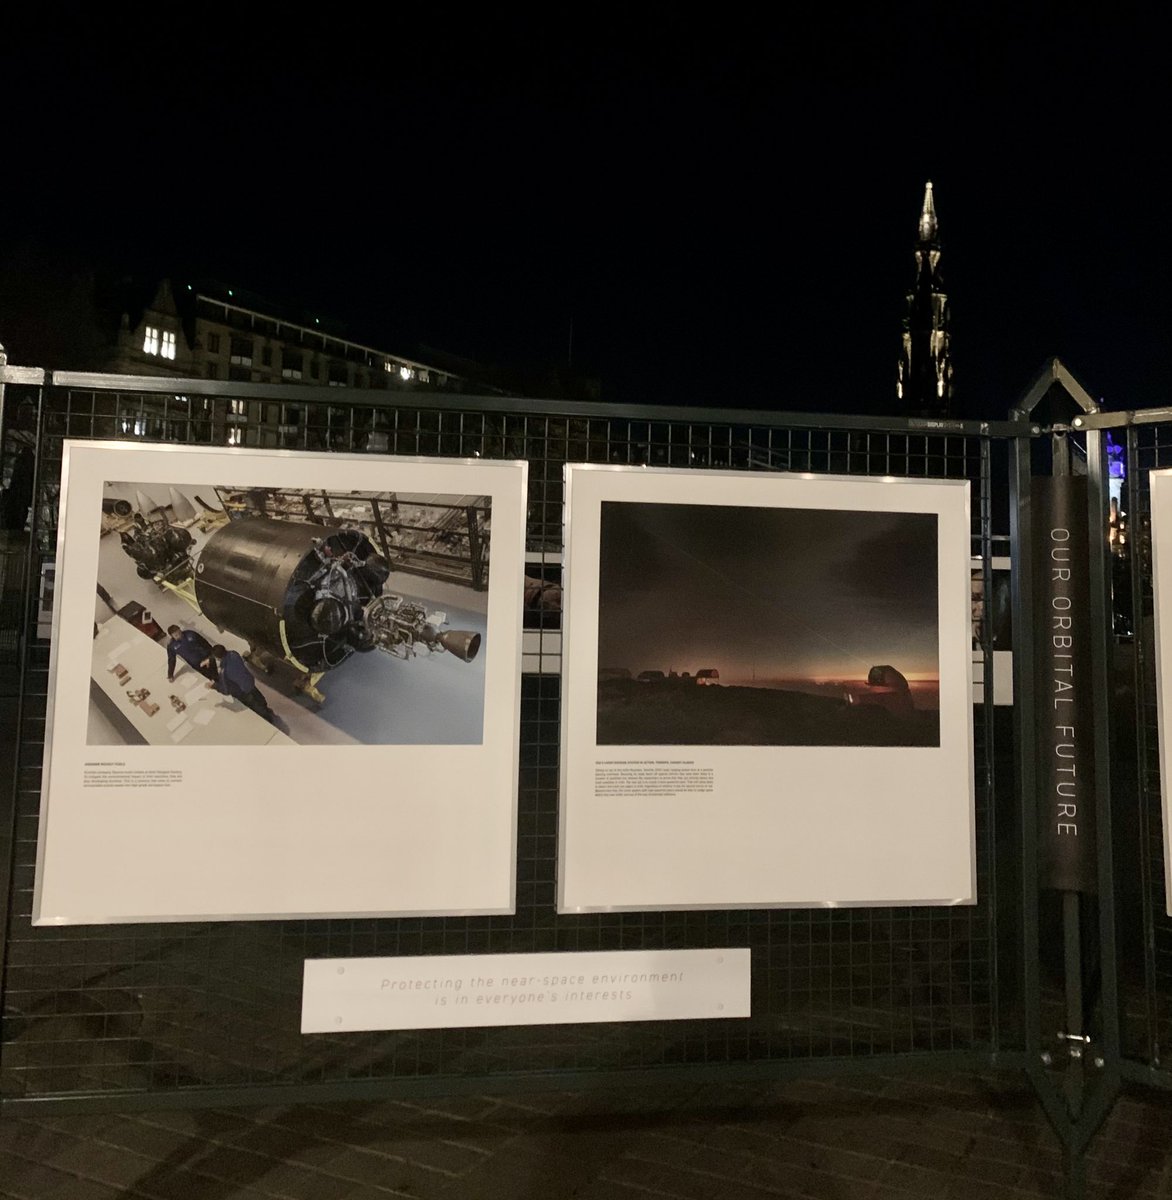 If you happen to take a moonlit walk between now and 18th April, stop by the Mound in Edinburgh to check out @MaxA_Photo’s ‘Our Fragile Space’ exhibition as part of the Edinburgh Science Festival, which #Skyrora is proud to be featured in. ✨